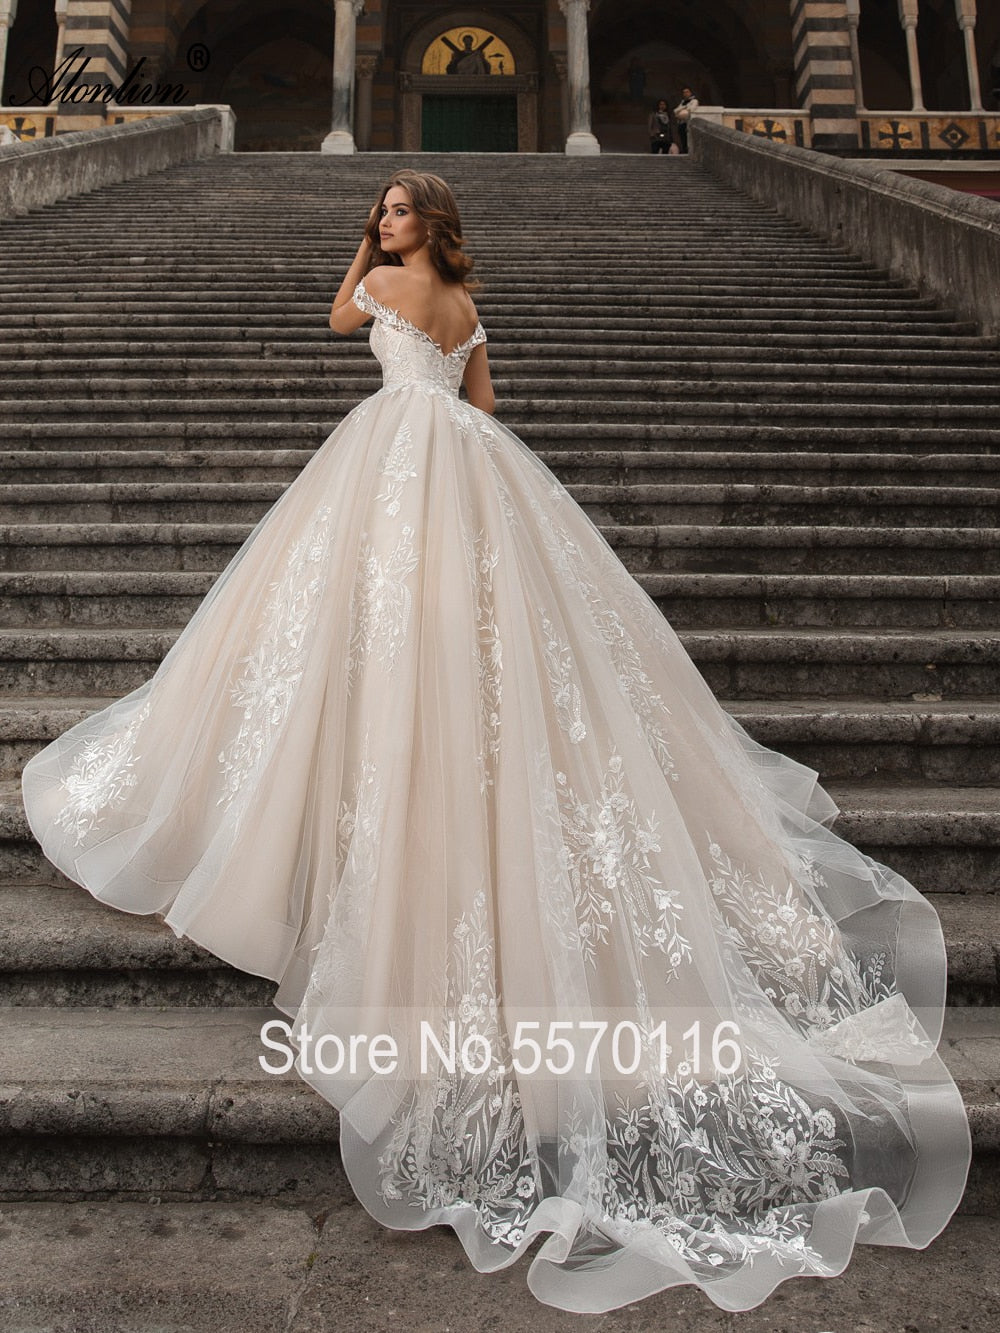 Modest Off Shoulder Sweetheart Neckline Wedding Dress With Lace Applique,  Crystal Embellishments, And Chapel Train 2021 Collection From  Magicdress2011, $231.46 | DHgate.Com